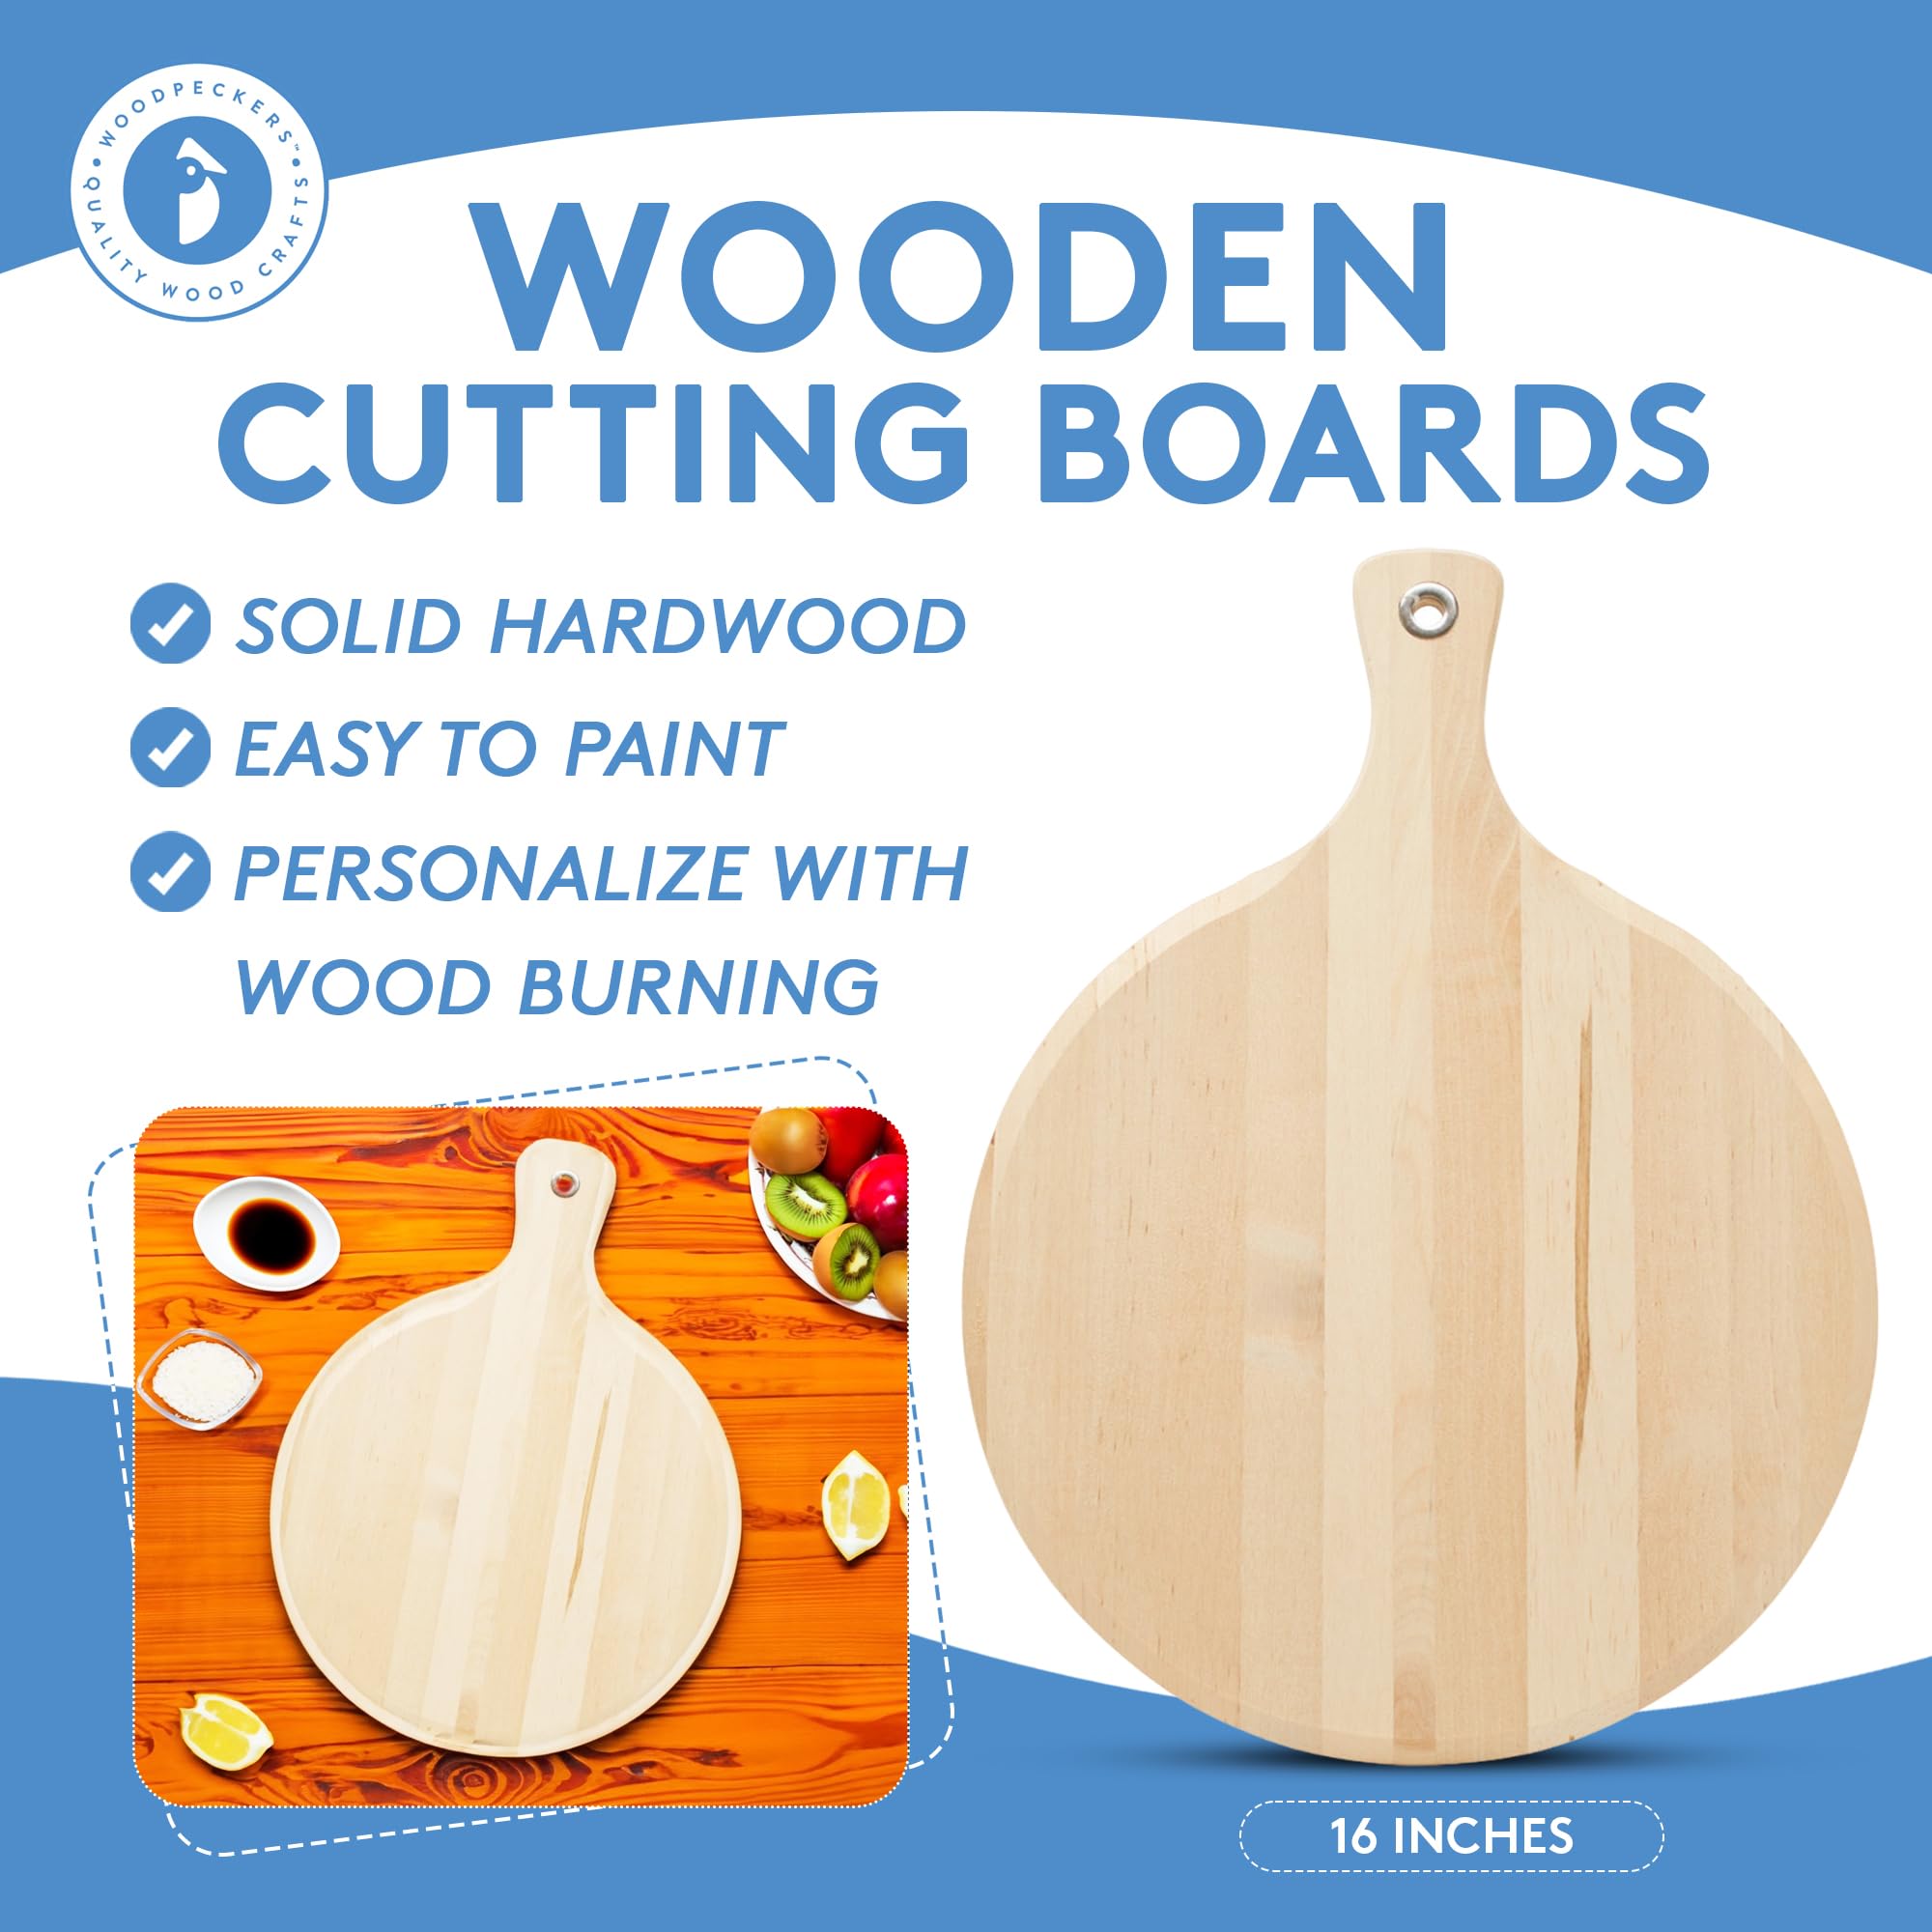 Wooden Cutting Board 16 inch, Pack of 1 Charcuterie Board, Large Round Wooden Cutting Board with Handle, Home Decor, by Woodpeckers